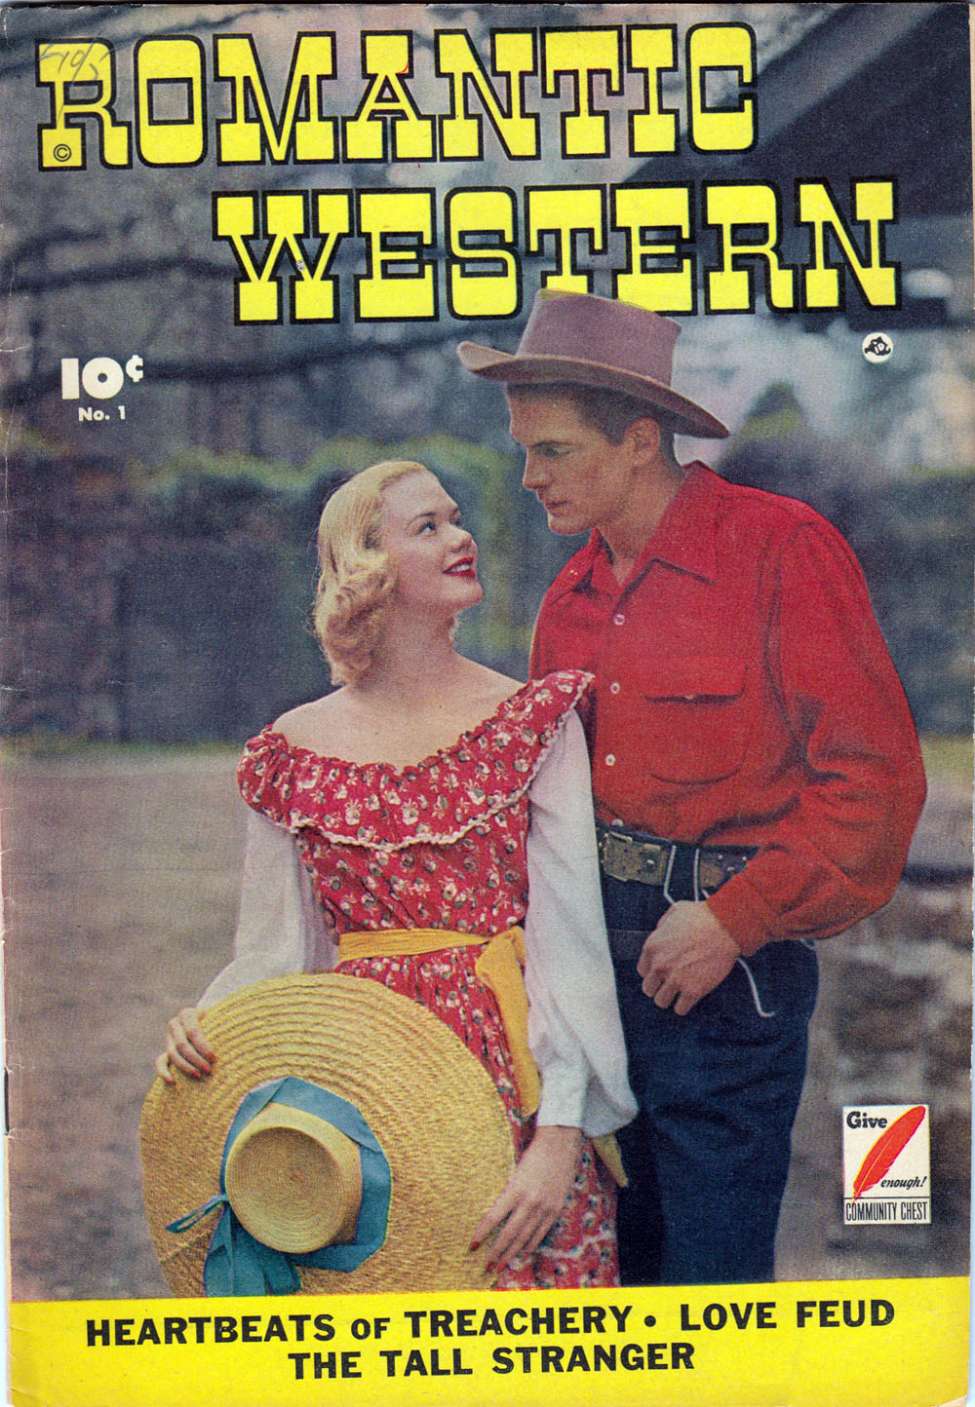 Book Cover For Romantic Western 1